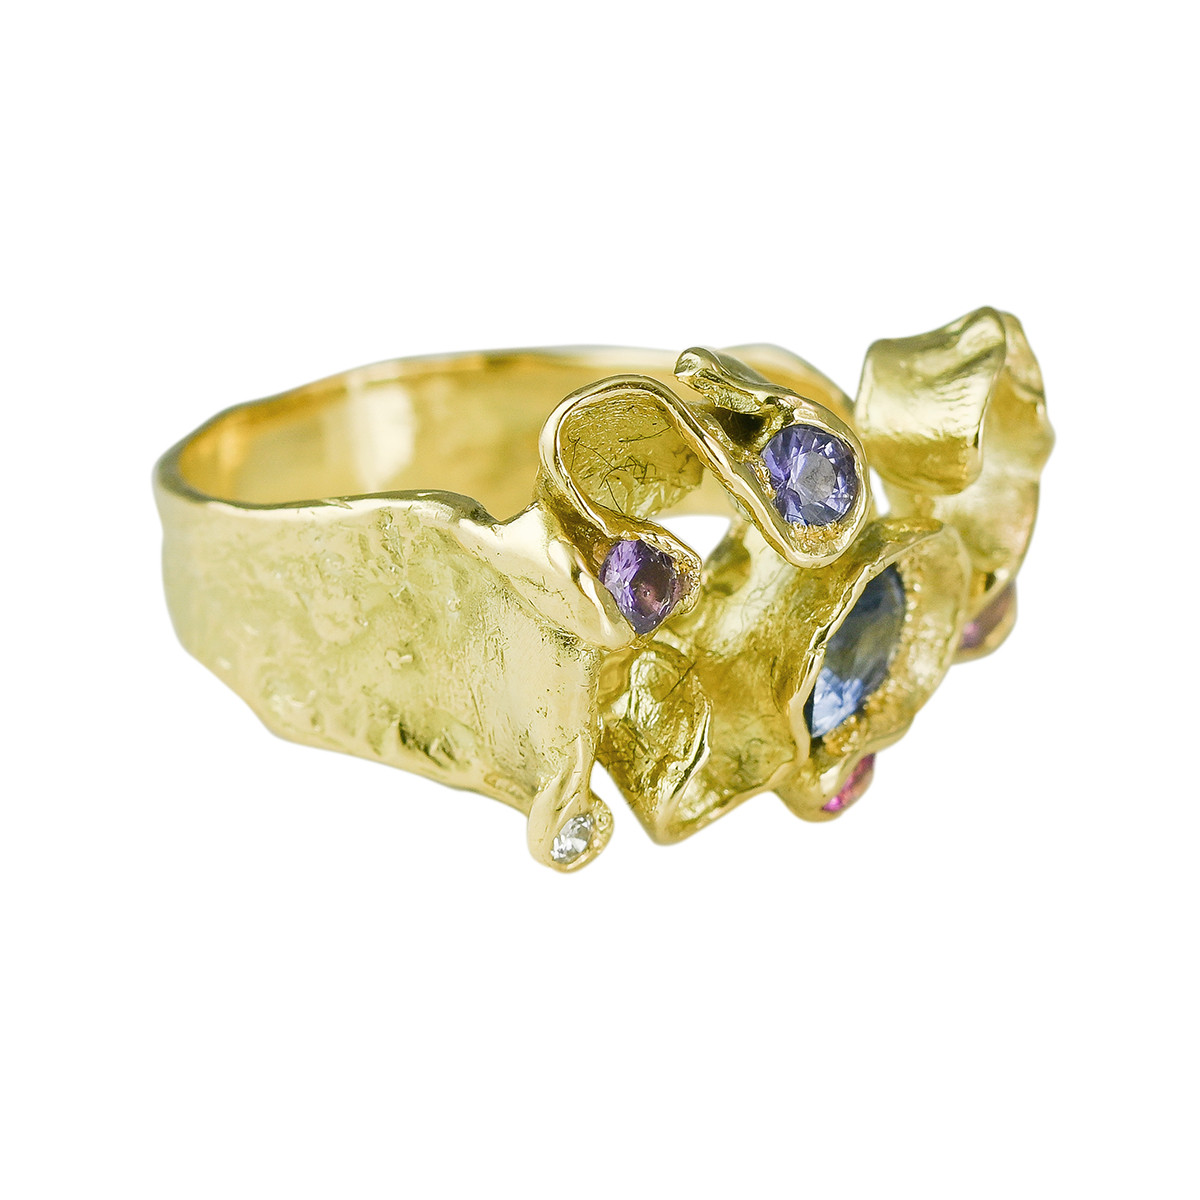 The Furbelow Bouquet Art Ring by Emily Nixon available at tomfoolery London as a part of Art Ring 2022 exhibition.